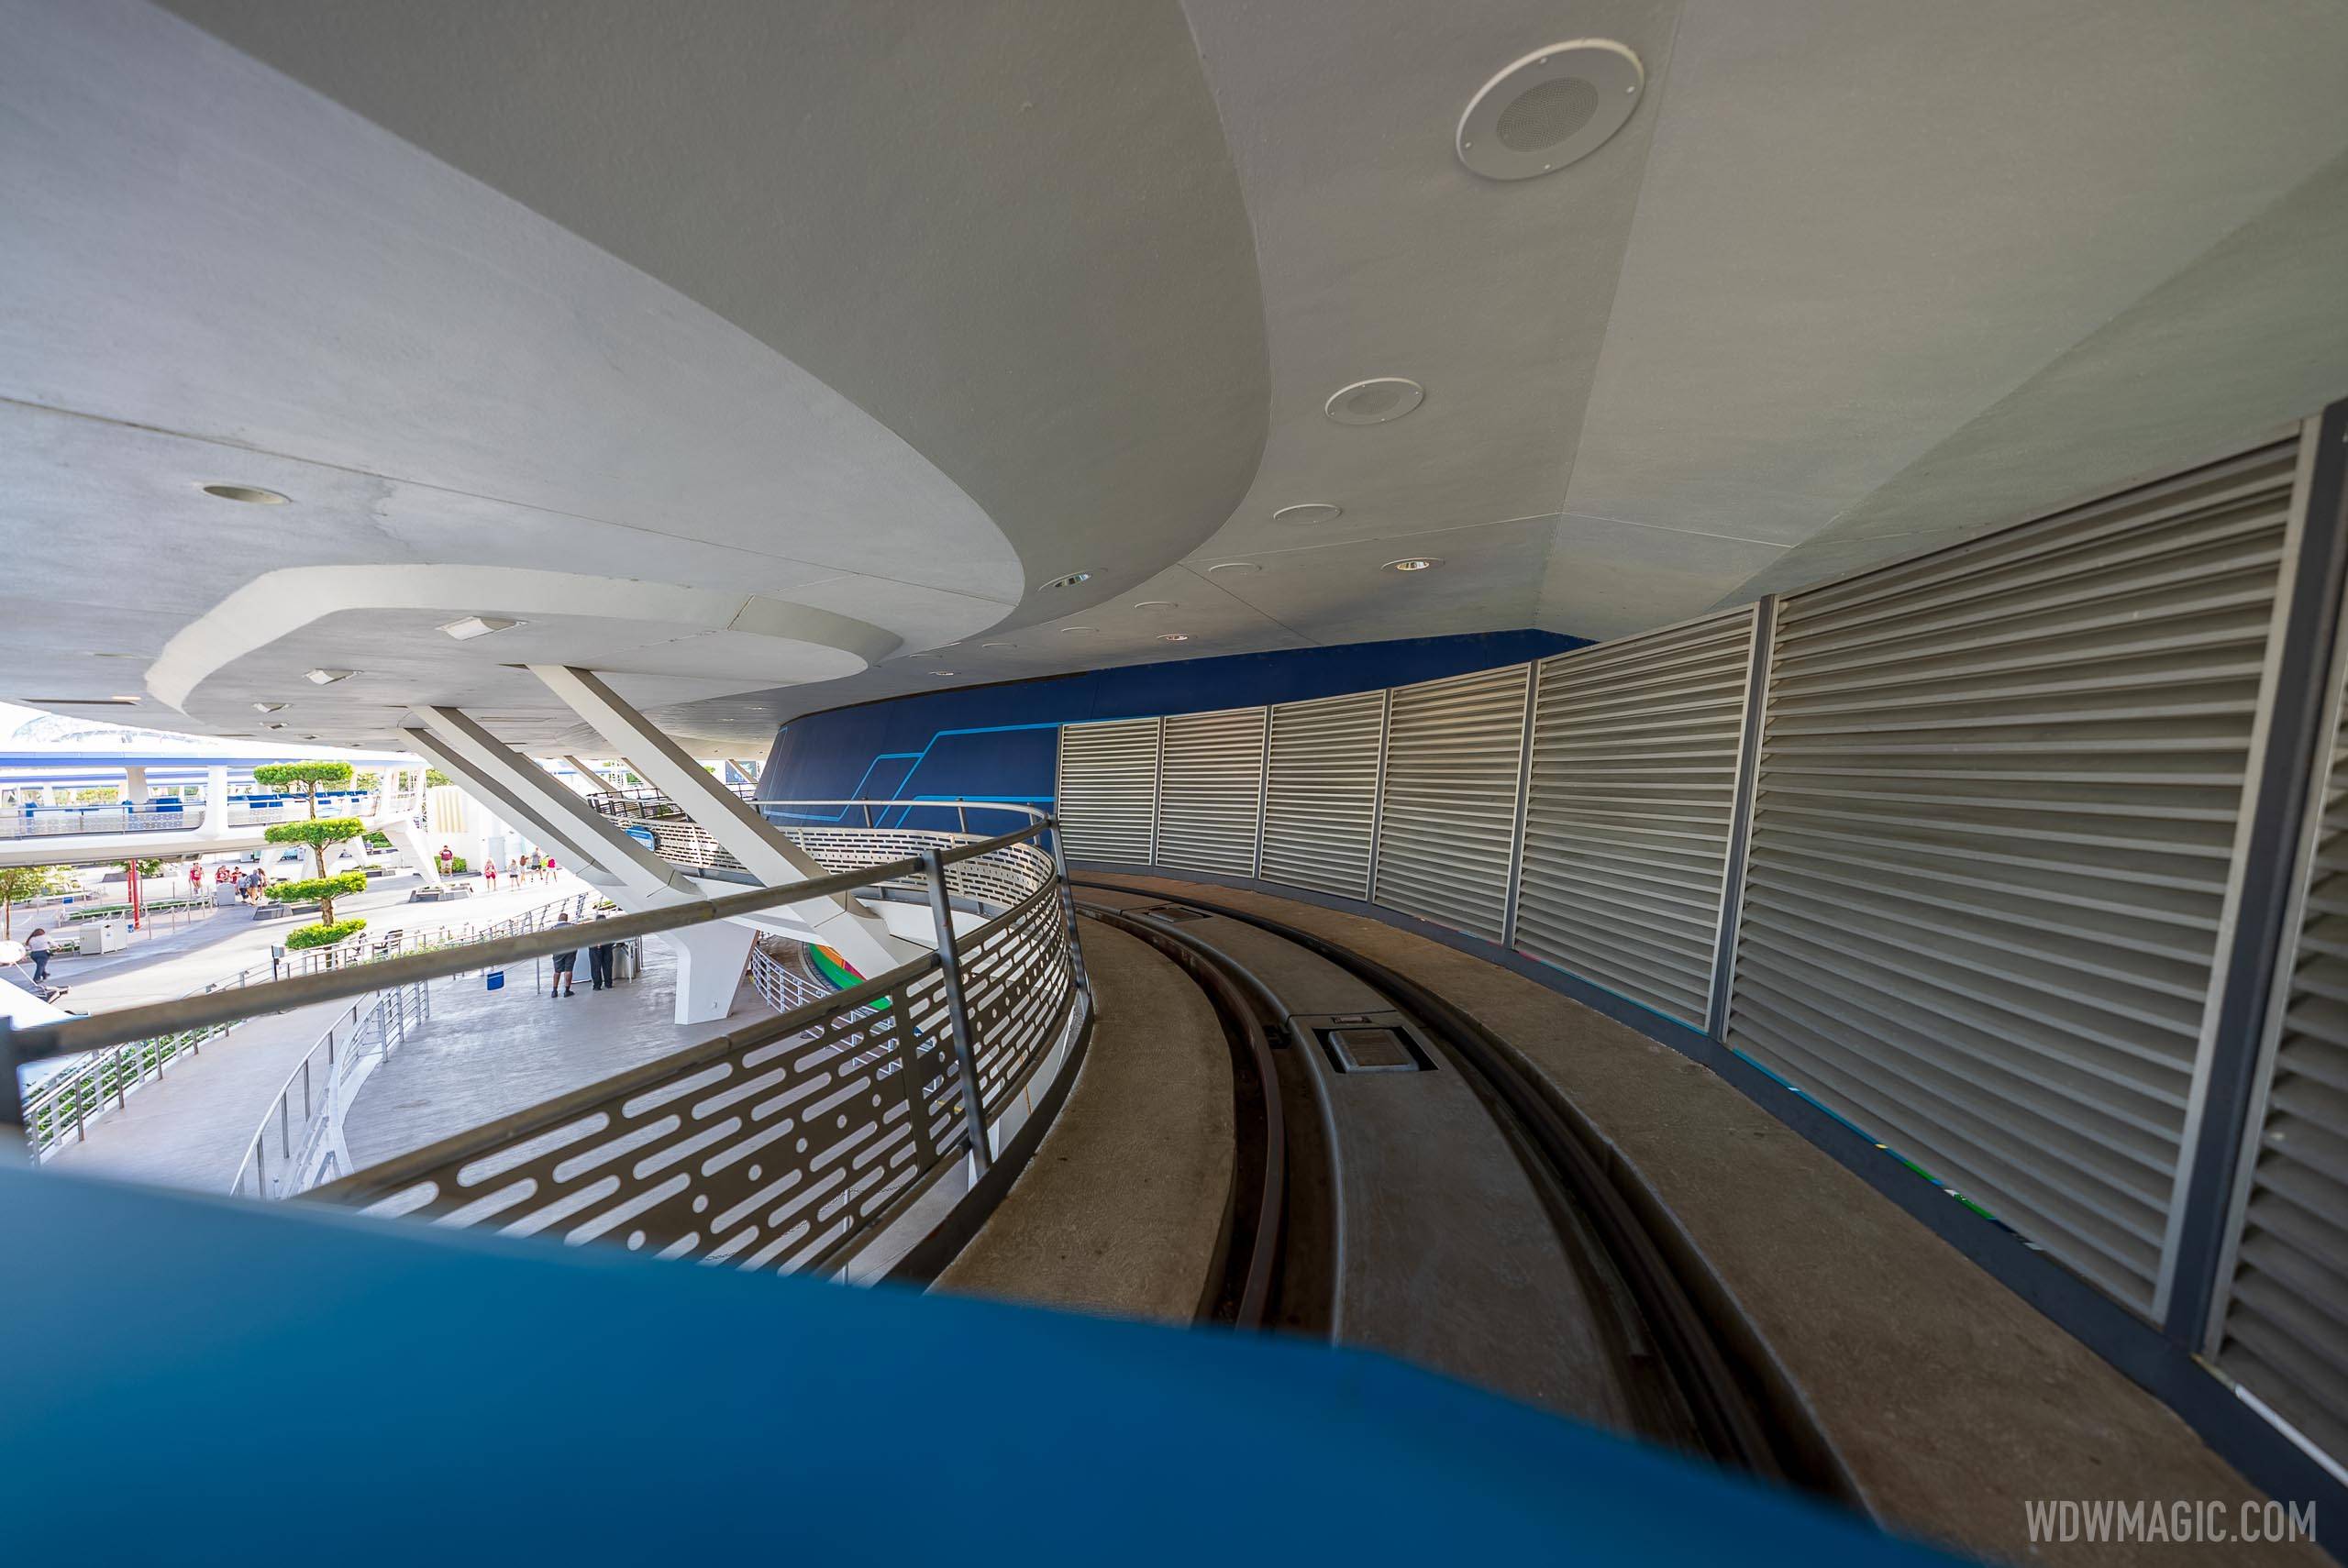 Tomorrowland Transit Authority reopens after refurbishment